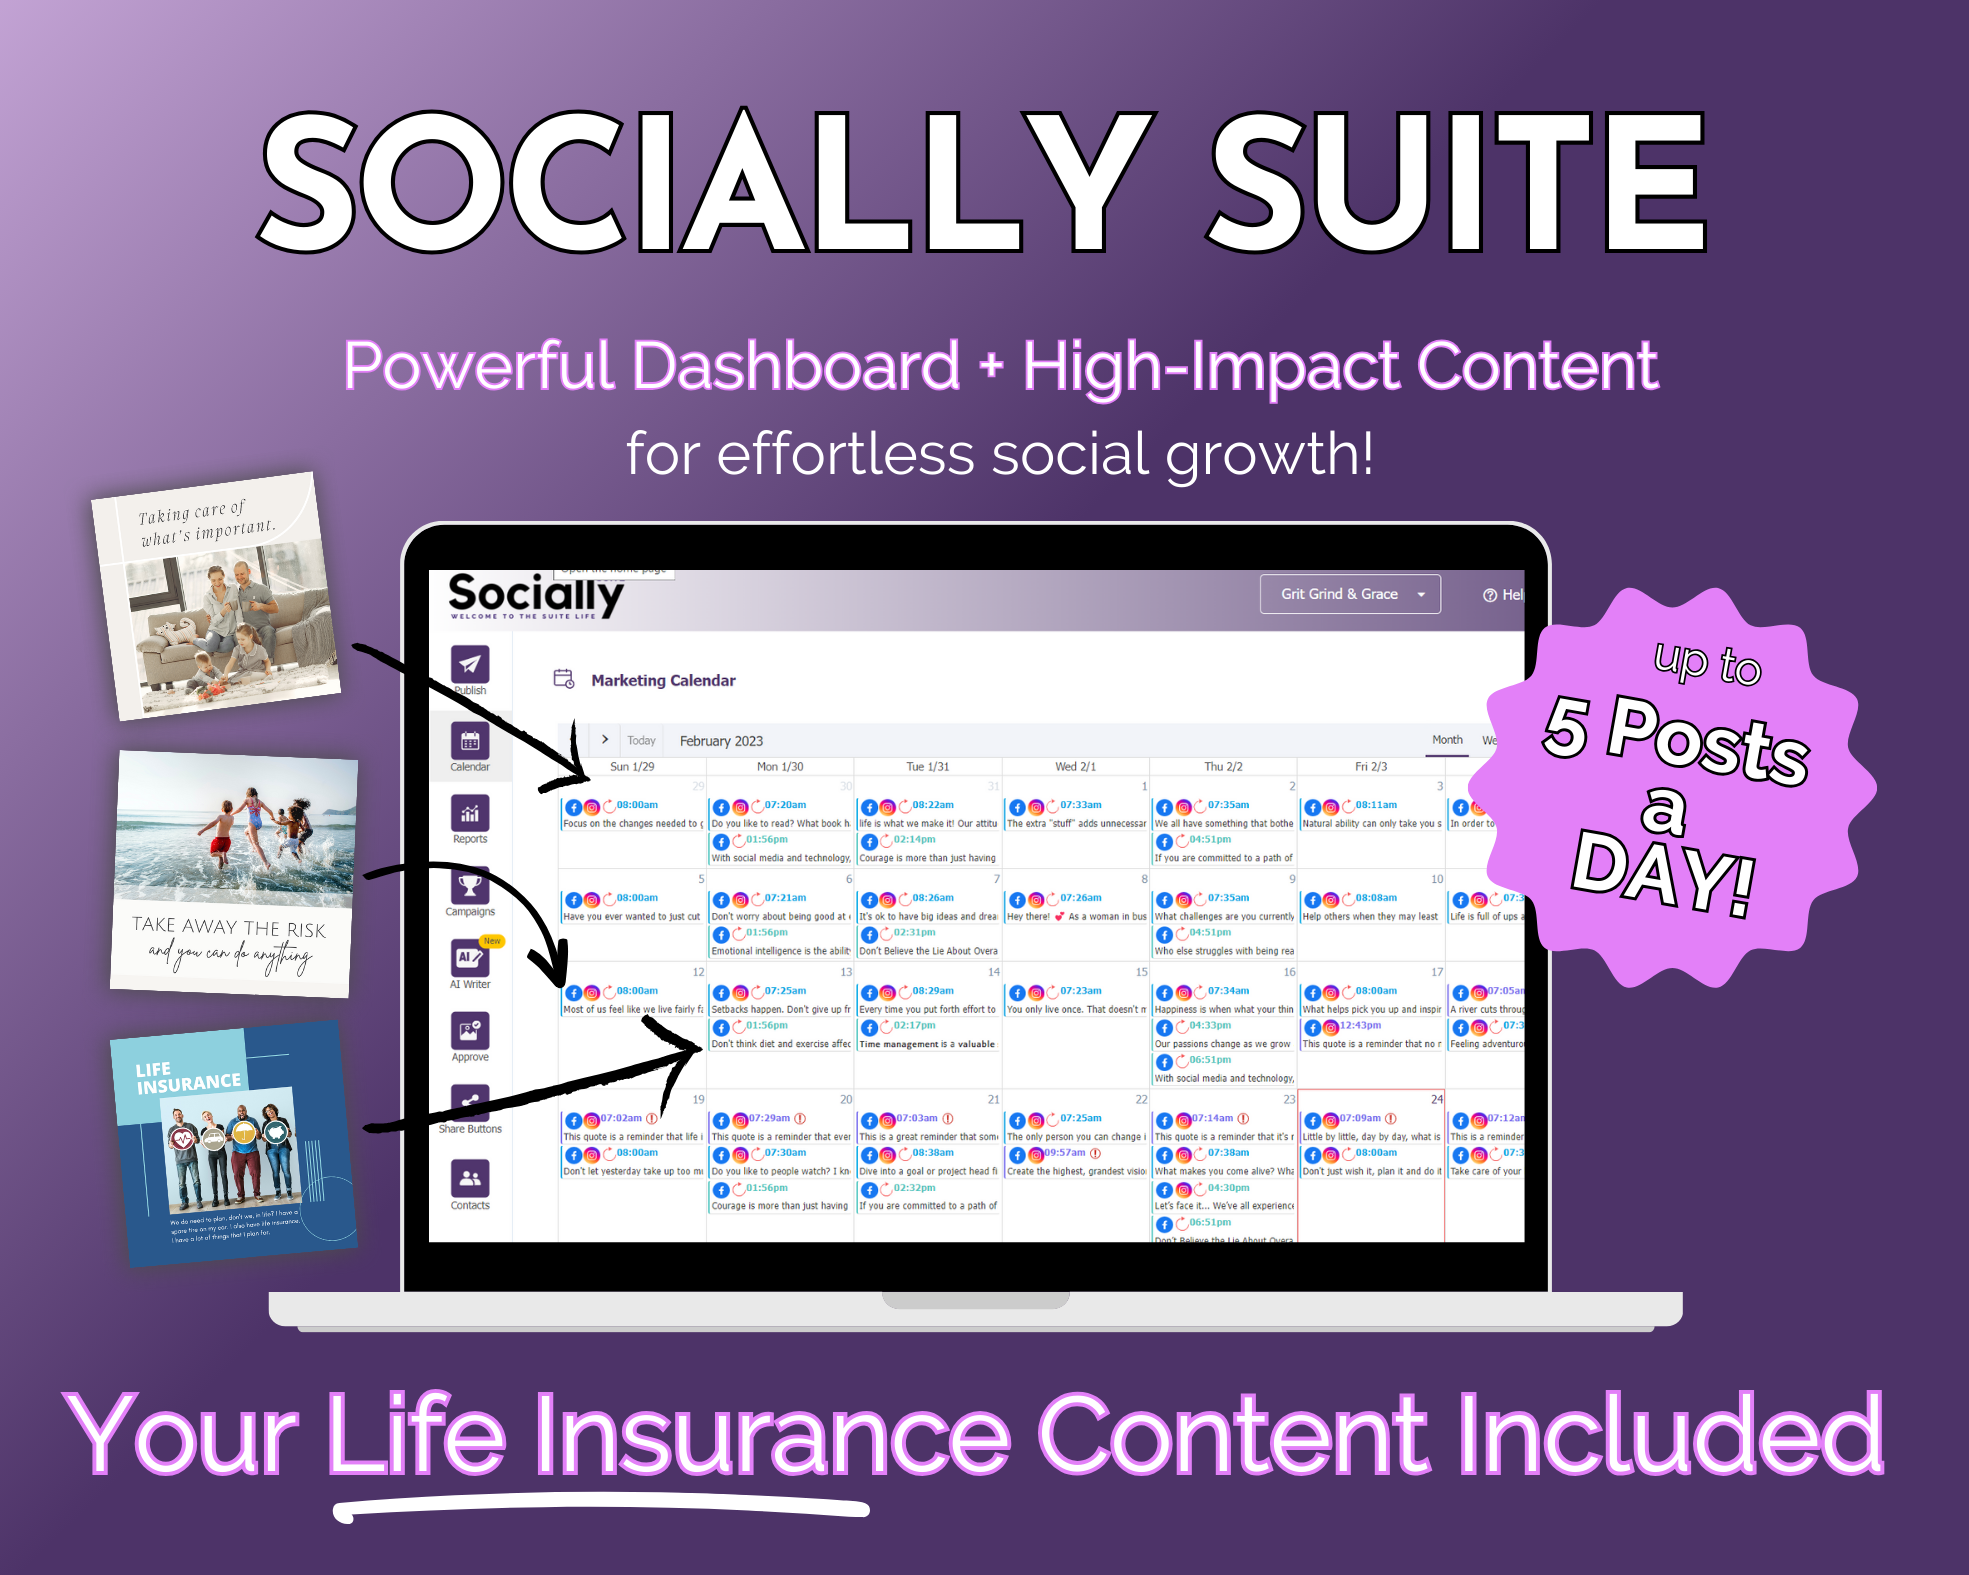 Get Socially Inclined's Socially Suite Membership - powerful dashboard for social media marketing and content management.